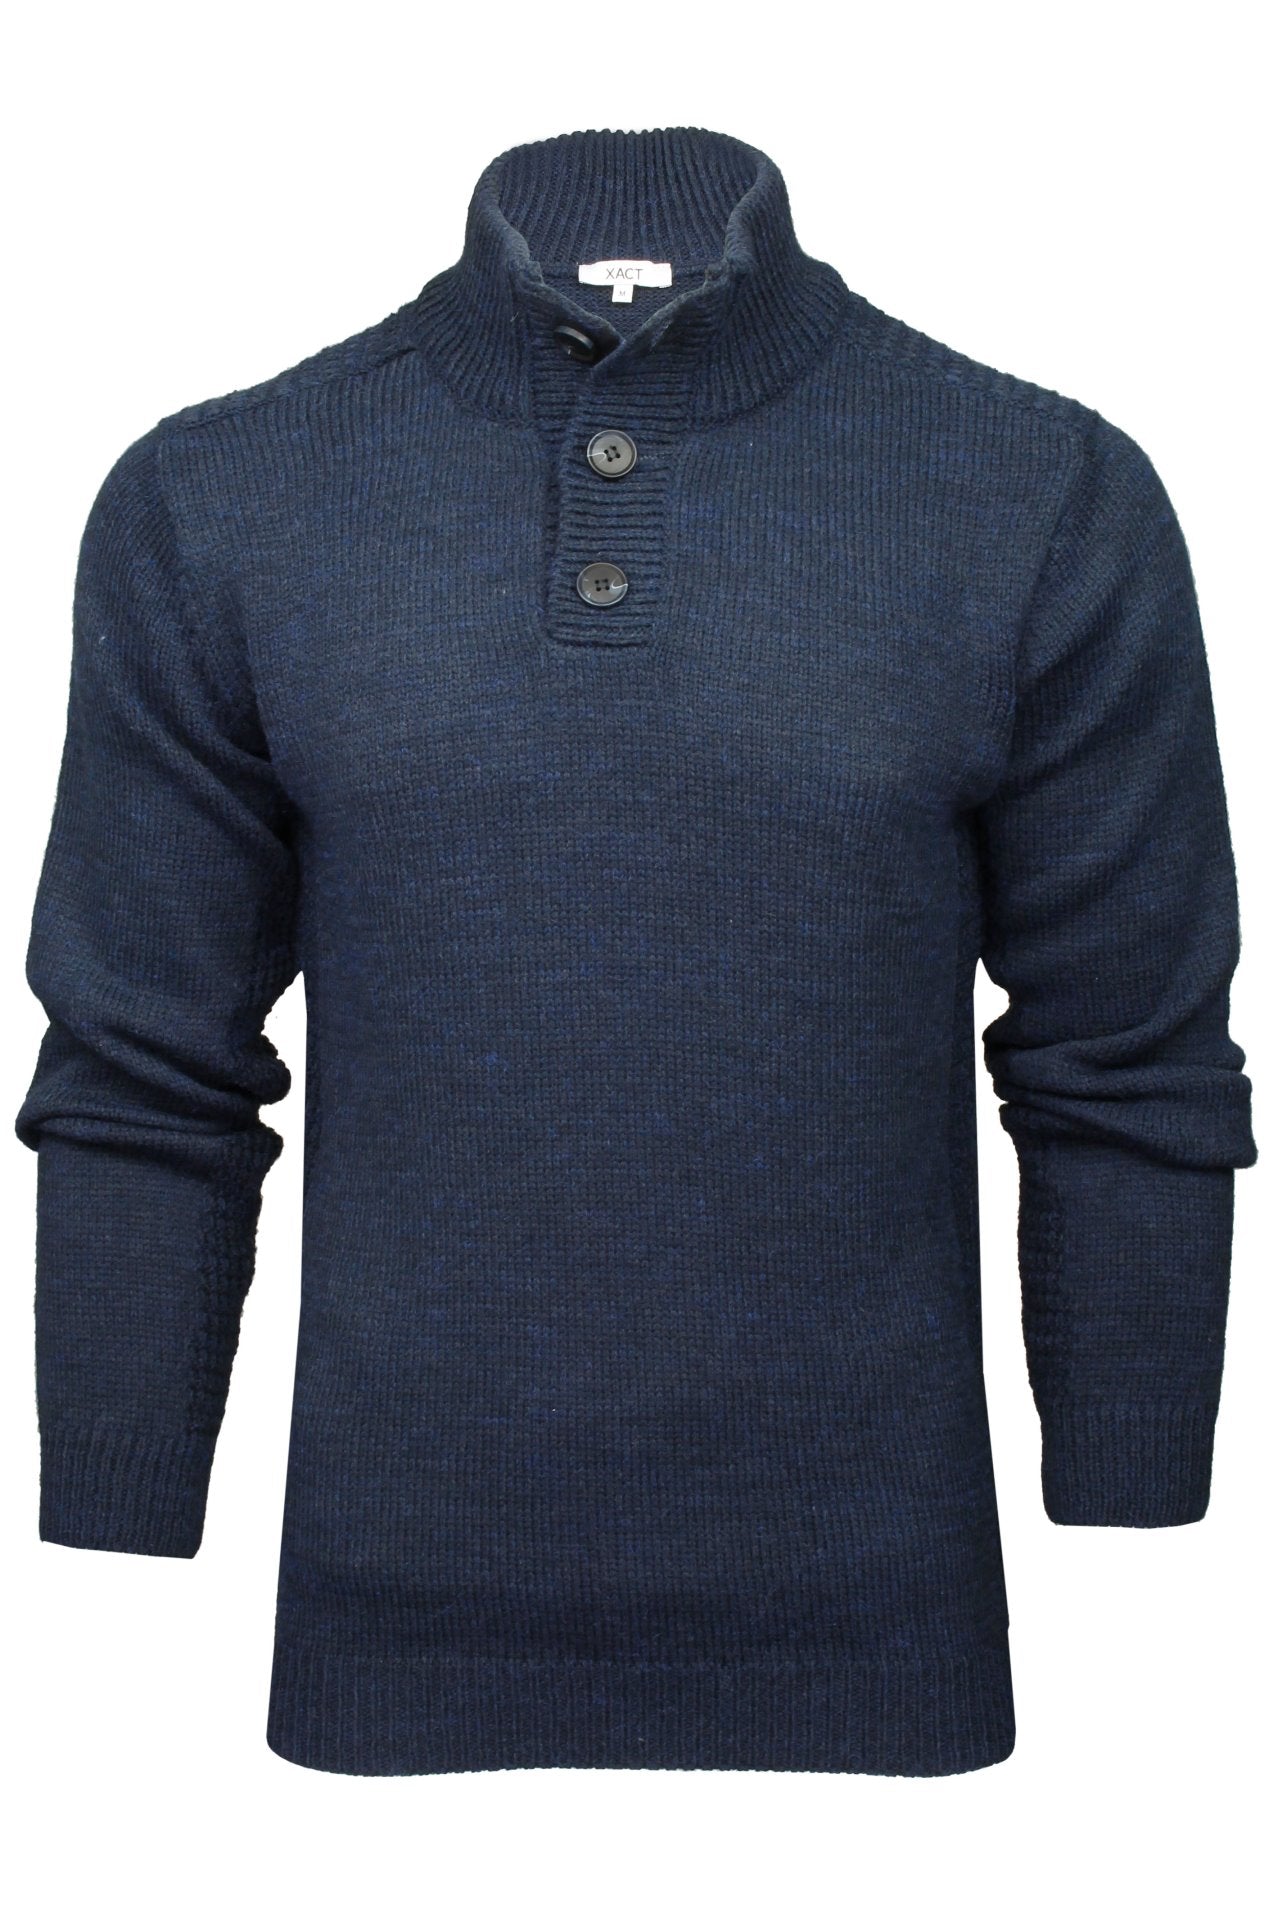 Xact Mens 3 Button Funnel Neck Jumper-Main Image